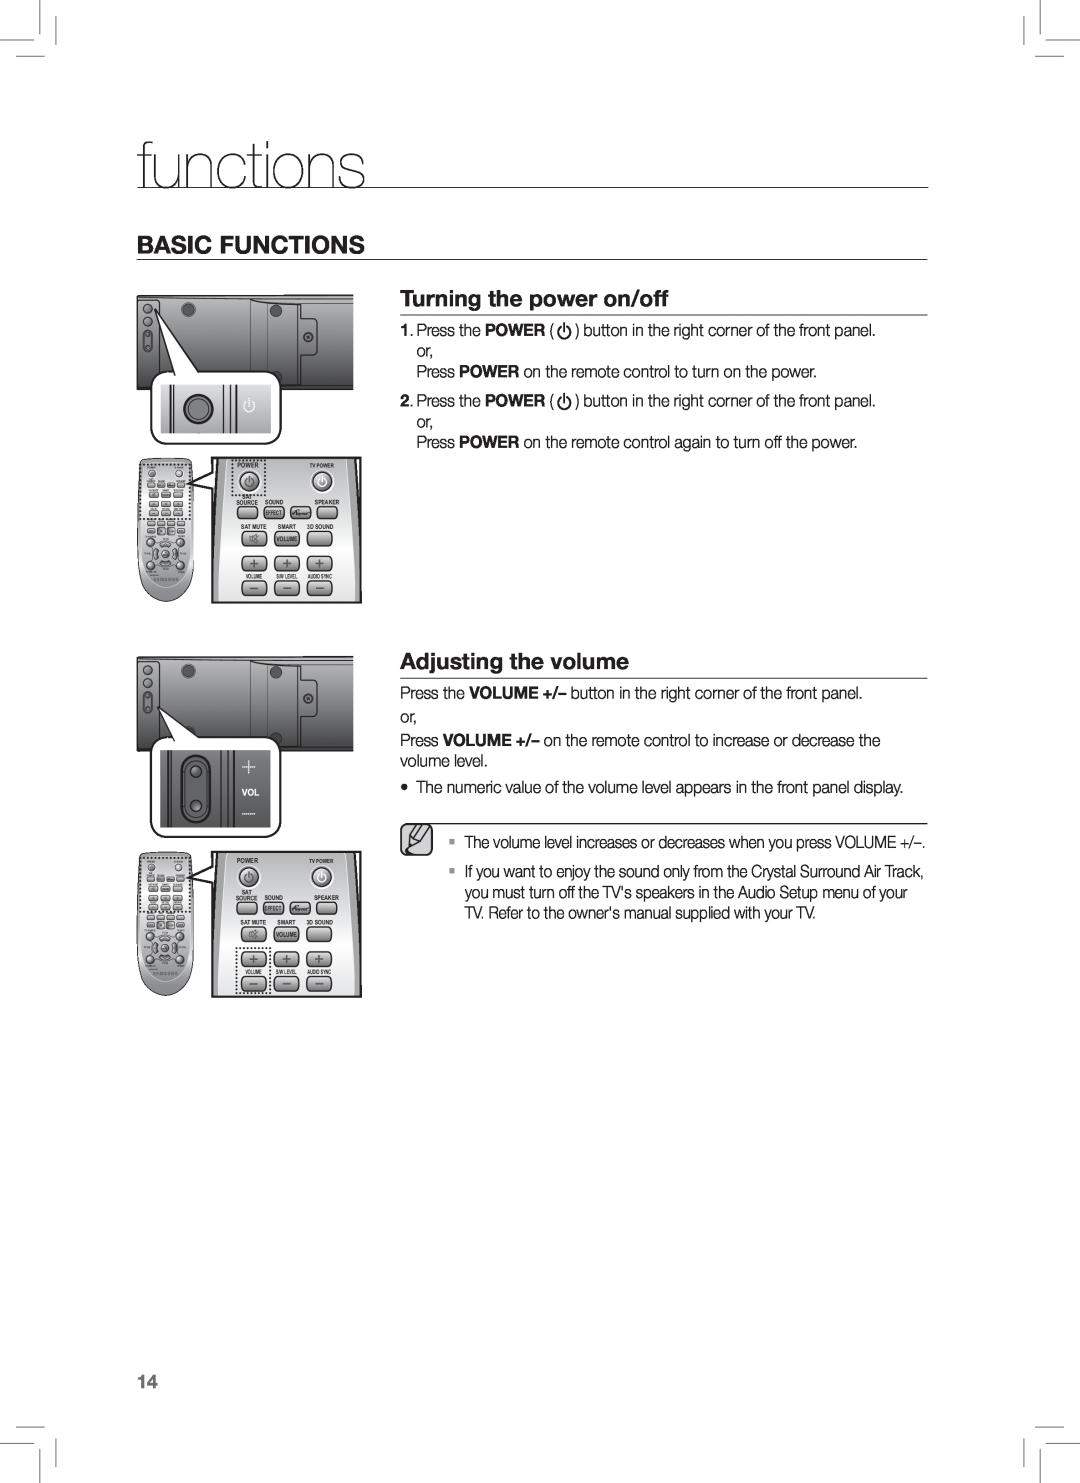 Samsung HW-E350 user manual functions, Basic Functions, Turning the power on/off, Adjusting the volume 